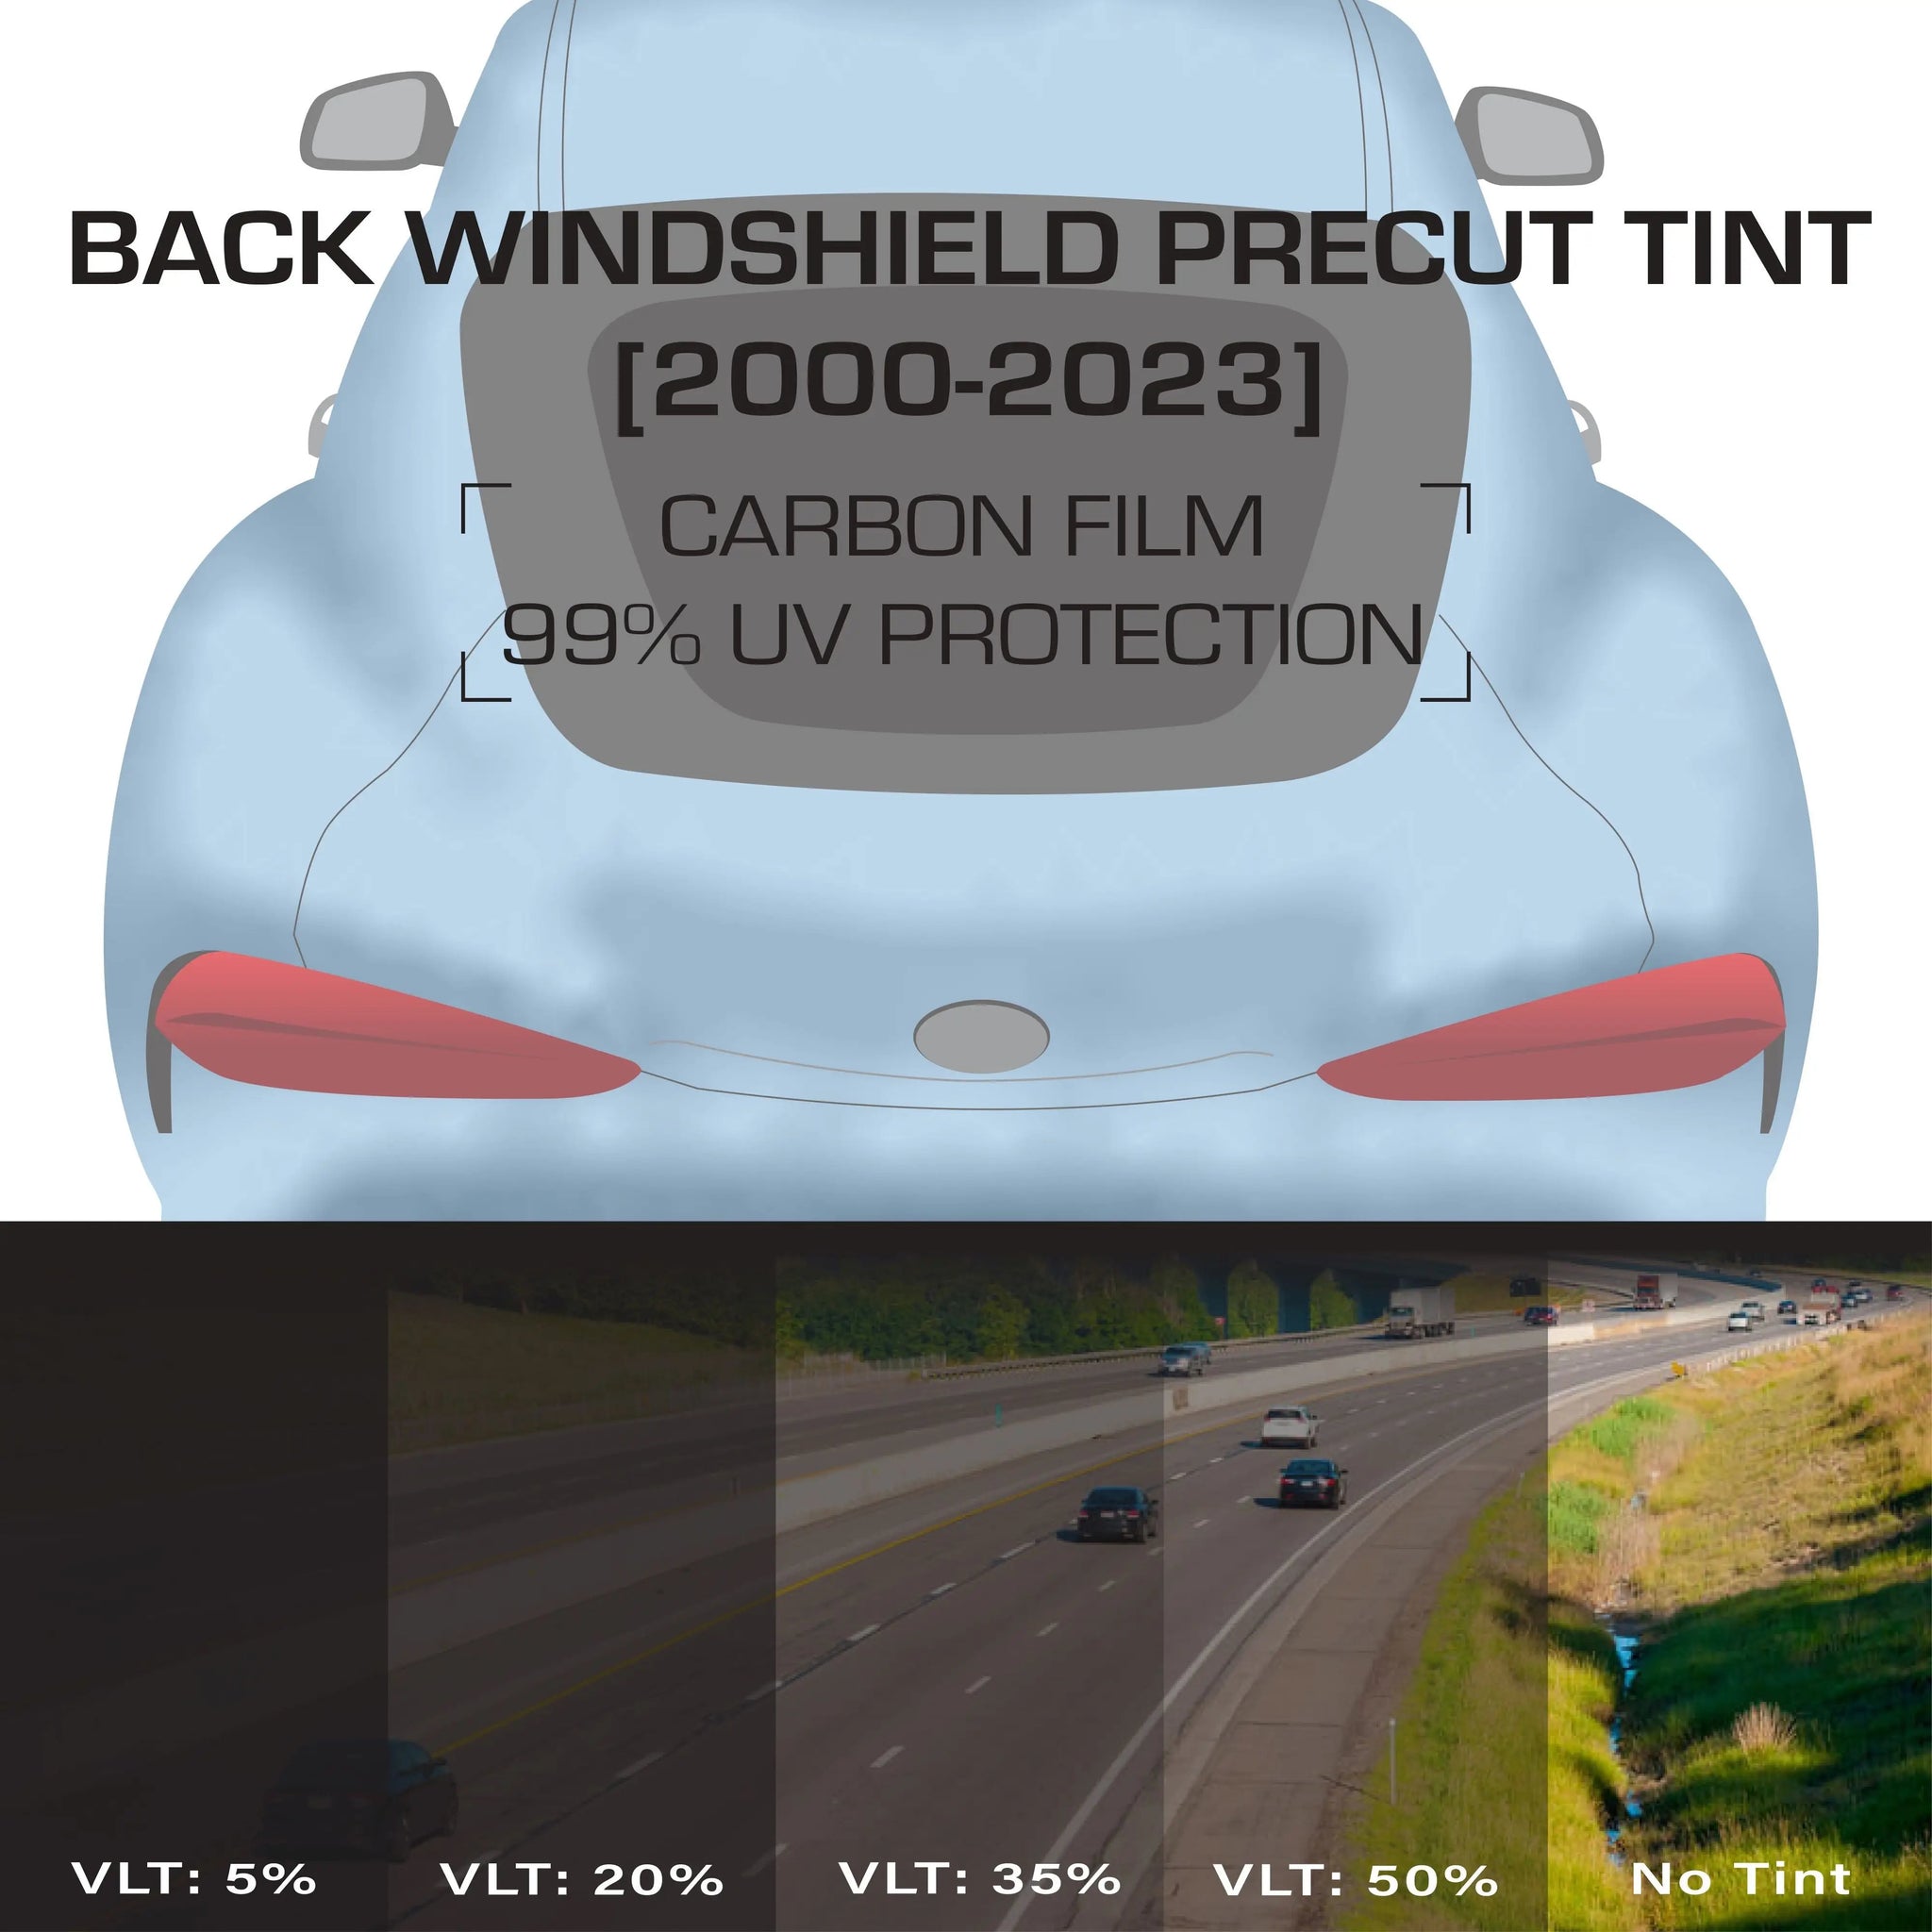 Back Windshield PreCut Tint for Vehicles 2000-2023